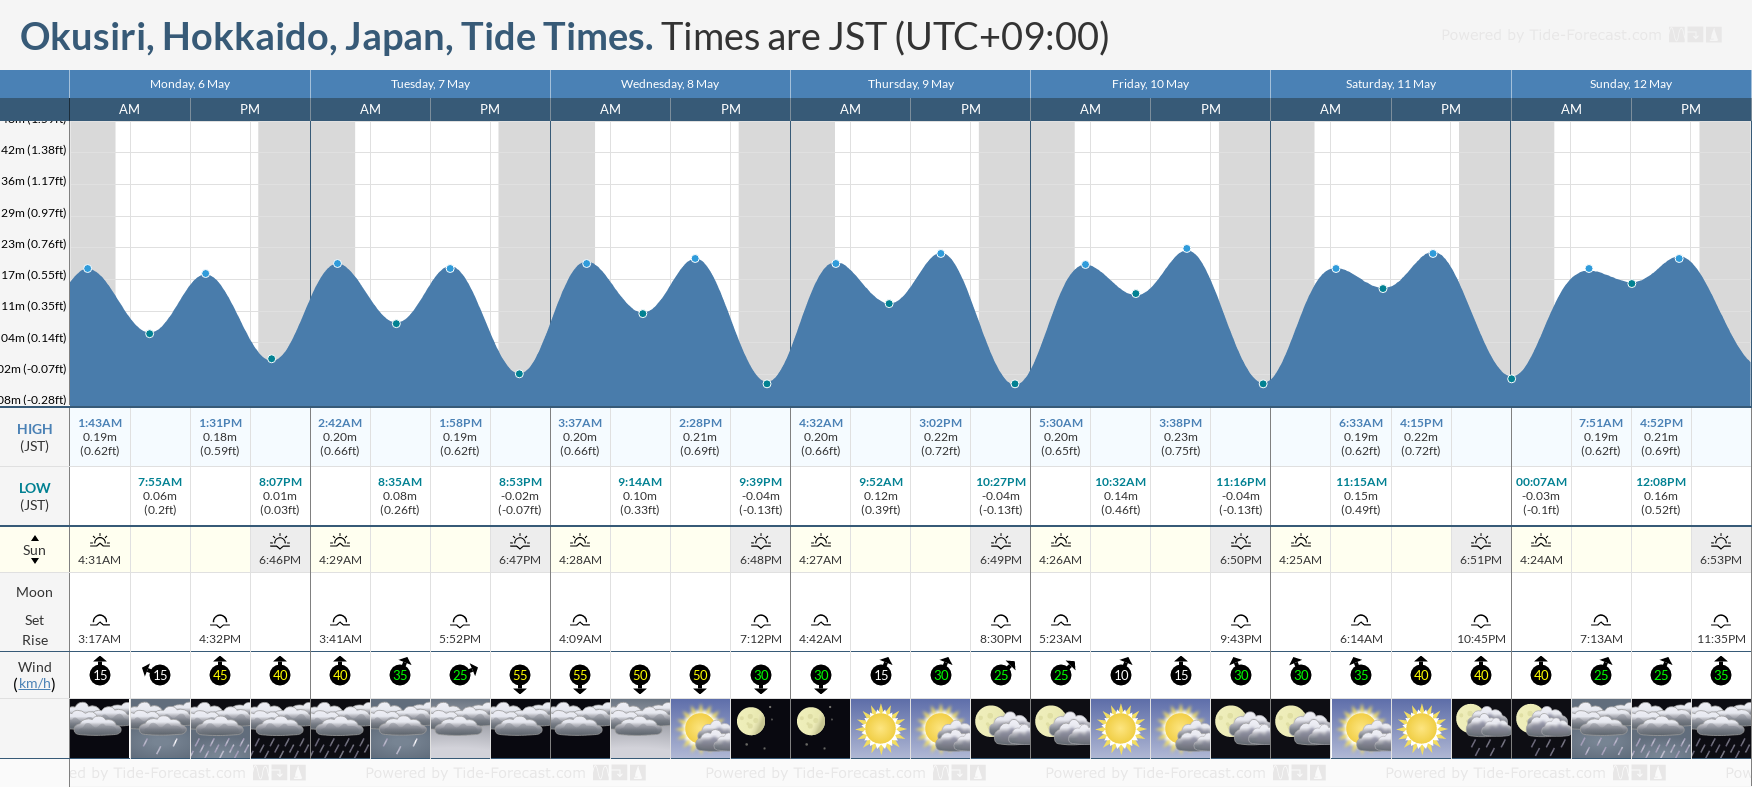 Okusiri, Hokkaido, Japan Tide Chart including high and low tide tide times for the next 7 days